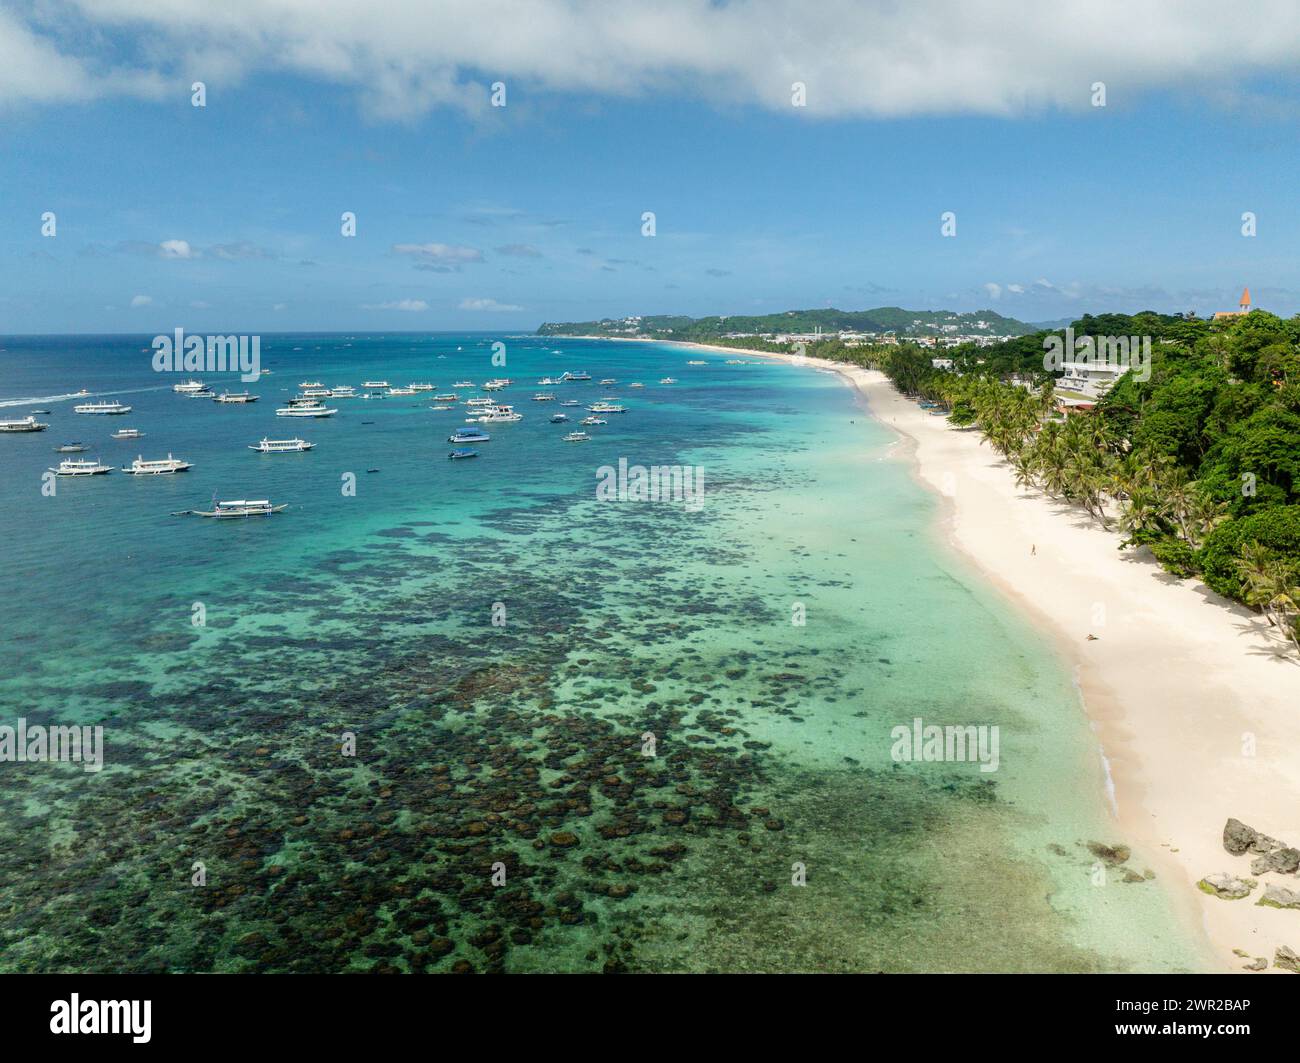 Tropical white sandy beach and transparent turquoise sea water with boats. Boracay, Philippines. Stock Photo